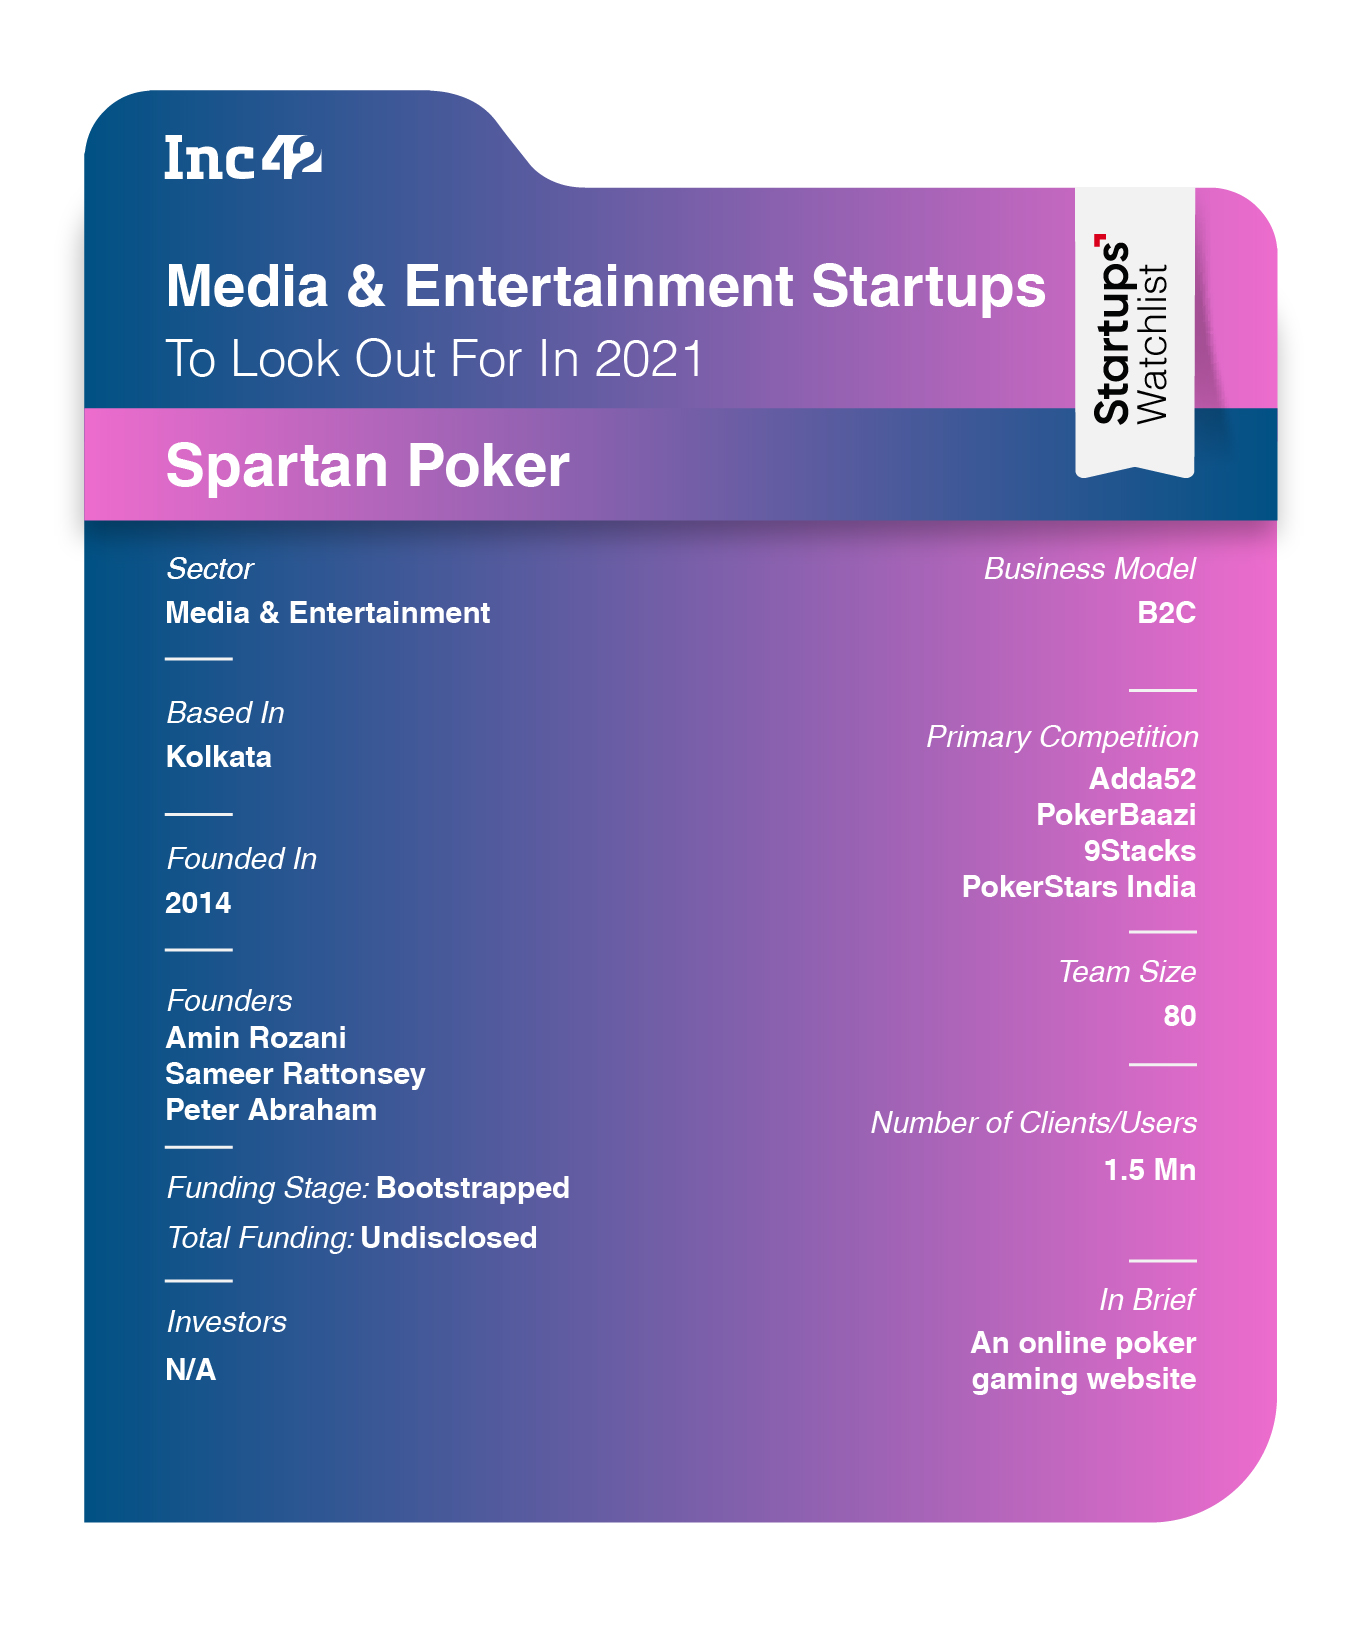 Spartan Poker: Offers Cash Games & Tournaments To Gaming Enthusiasts 